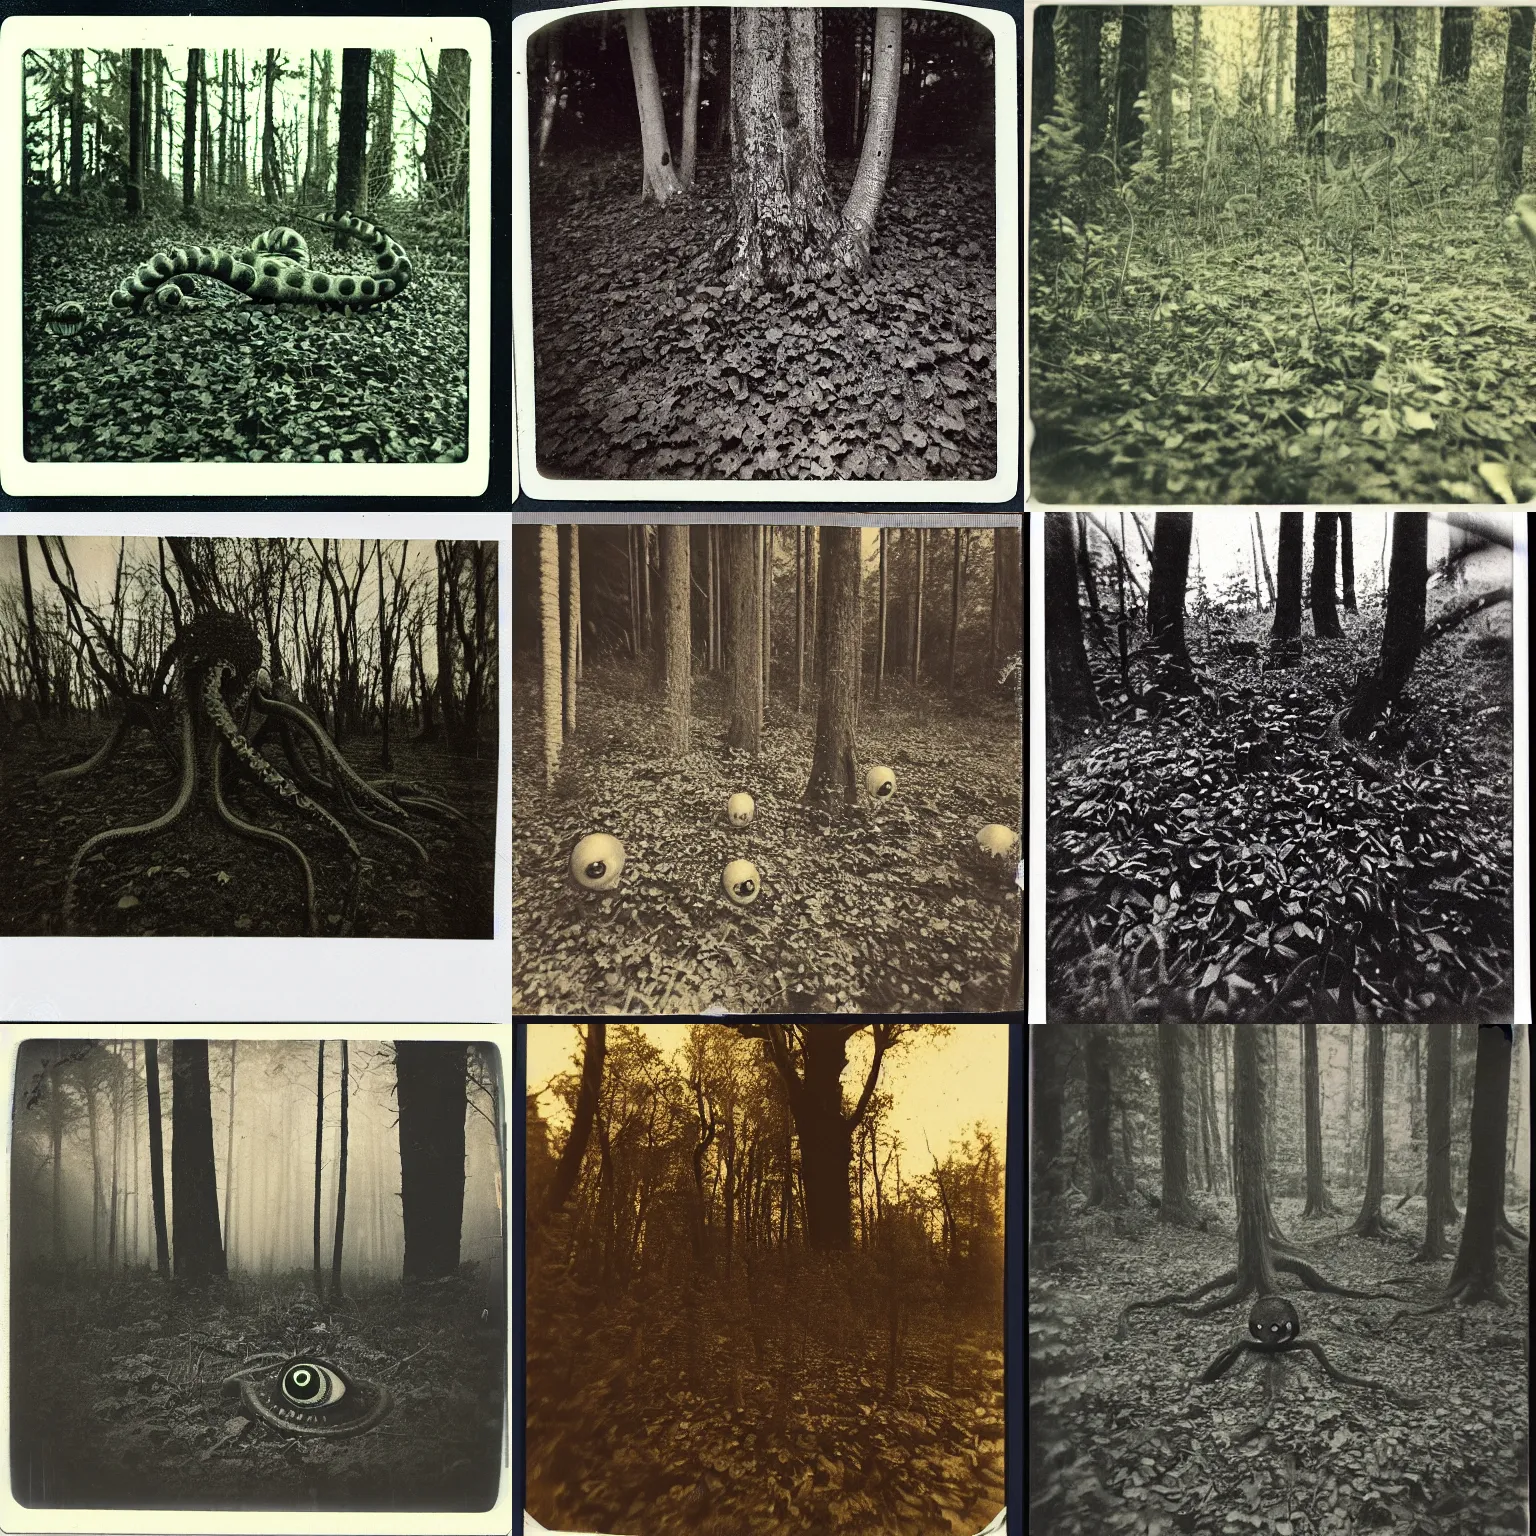 Prompt: old polaroid from 1 9 5 2 depicting large tentacles with eyeballs growing out of the forest floor, at dusk